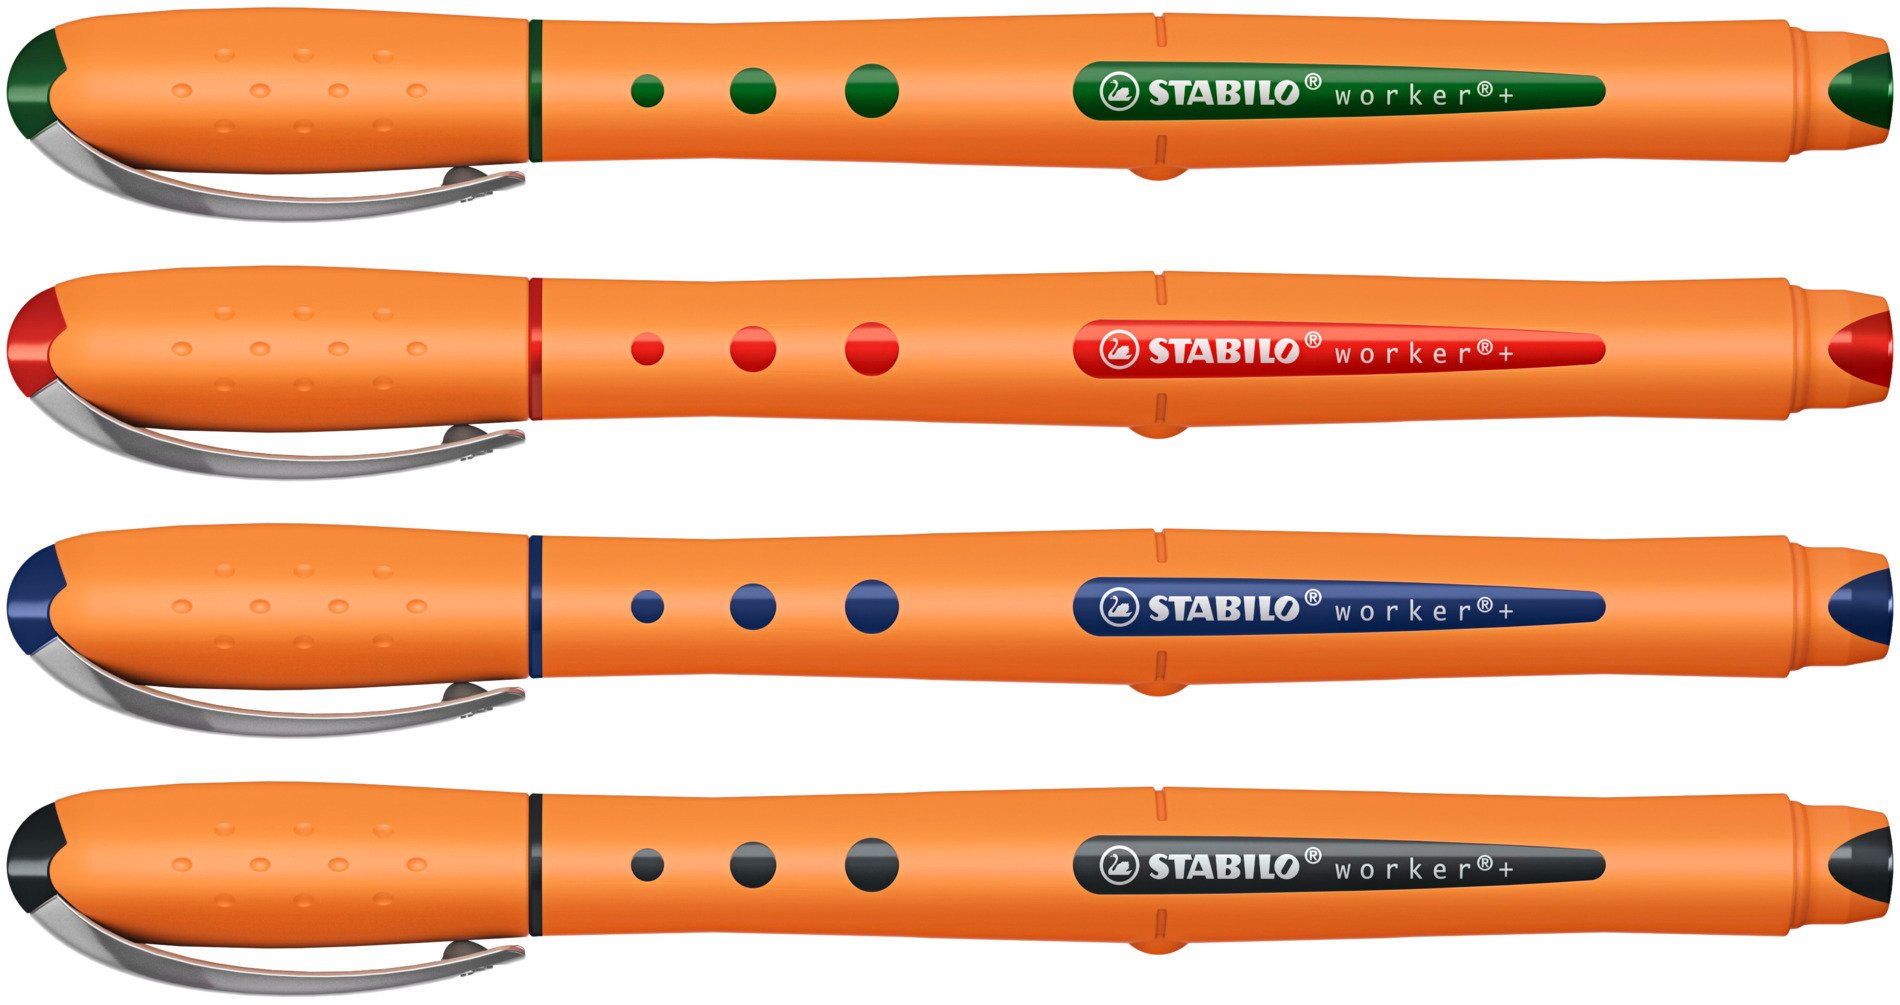 All STABILO products for writing